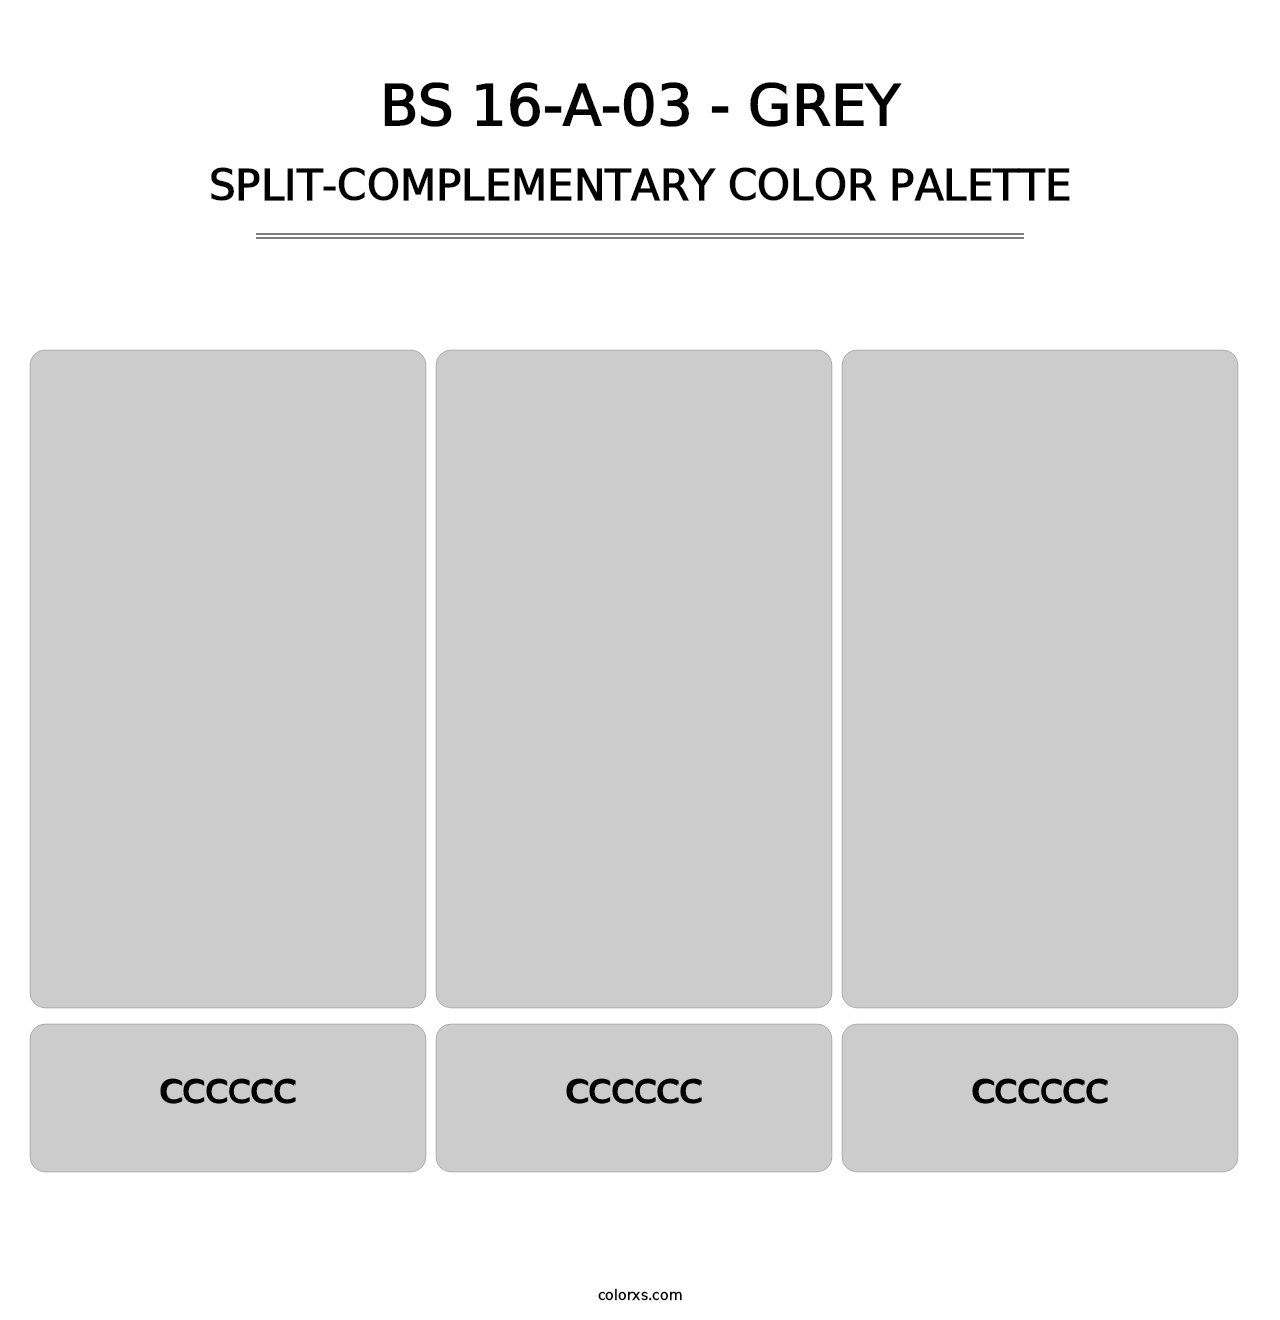 BS 16-A-03 - Grey - Split-Complementary Color Palette